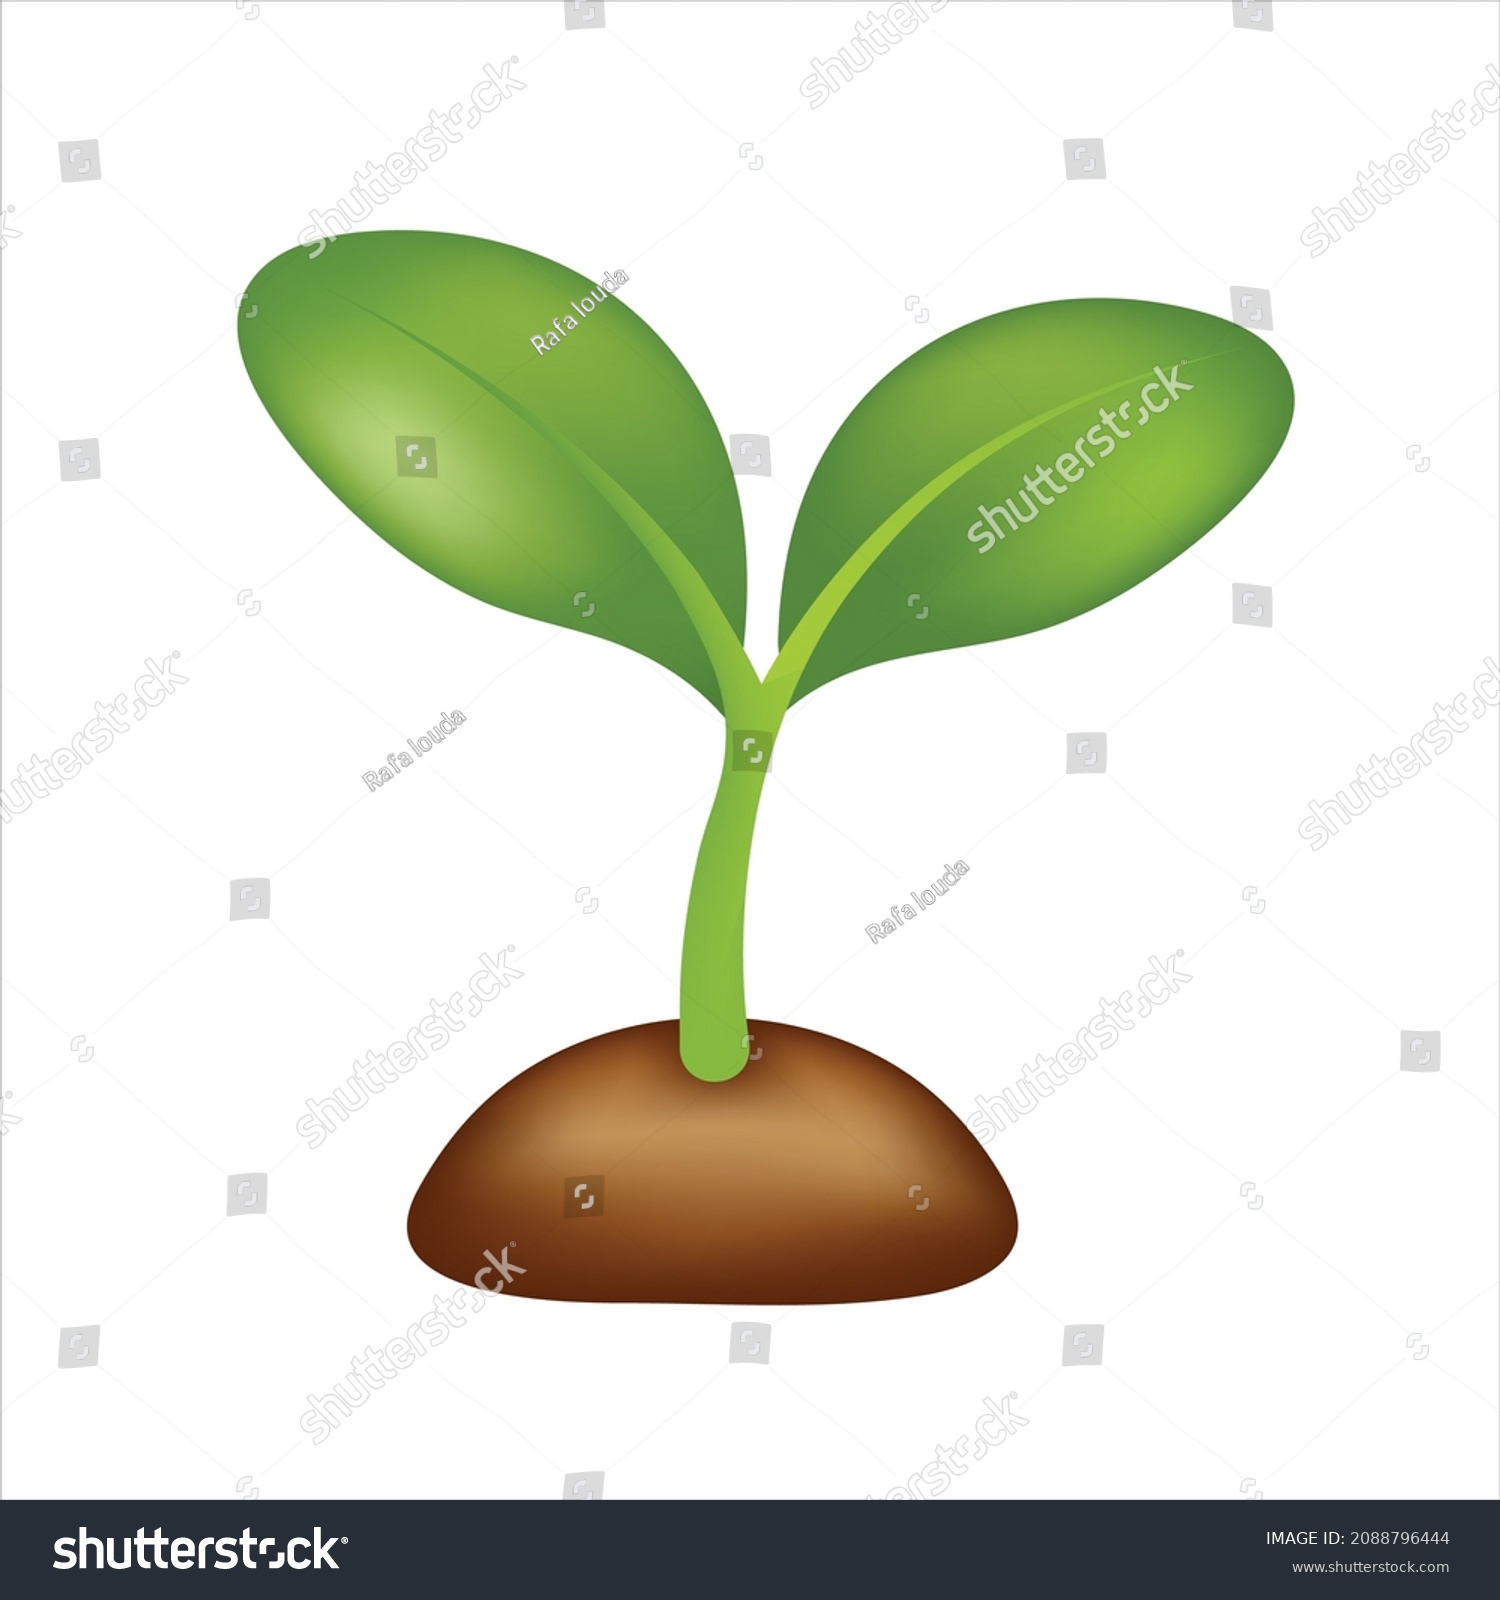 SVG of Seedling Sprouting Sprout Spring icon vector template Use for text emoji emotion expression reactions chat comment social media app smartphone to family friends svg